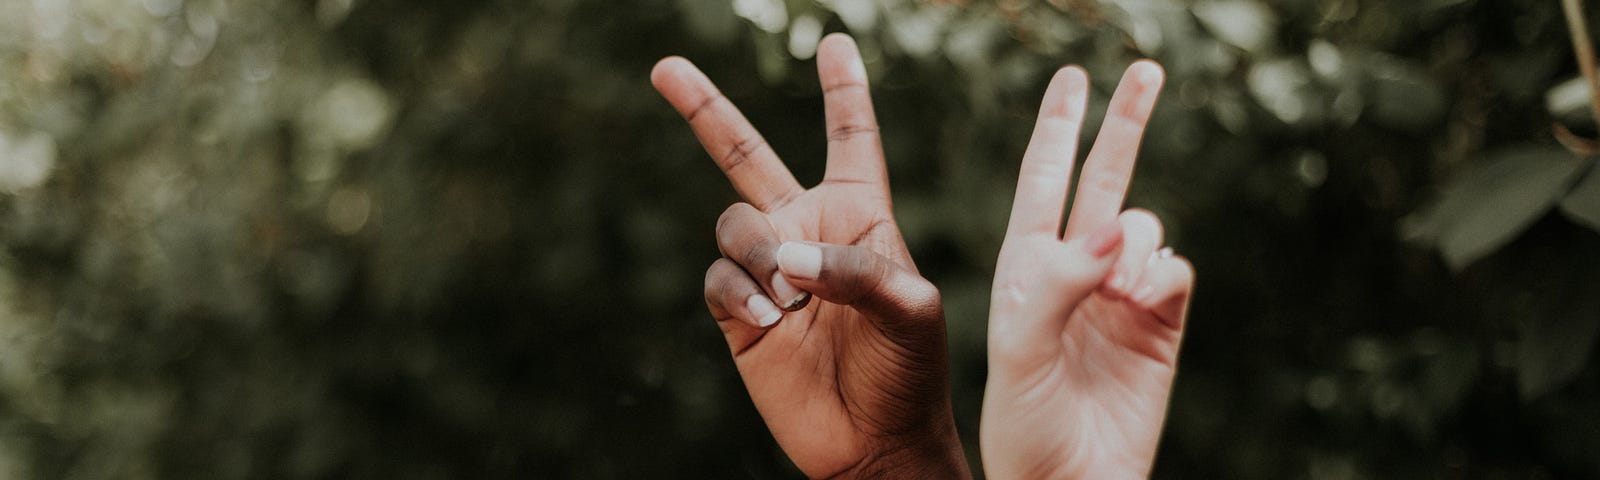 this is a photo of two hands raised in peace signs. One appears to be from a Black person and one from a person who is white. They look like children’s hands